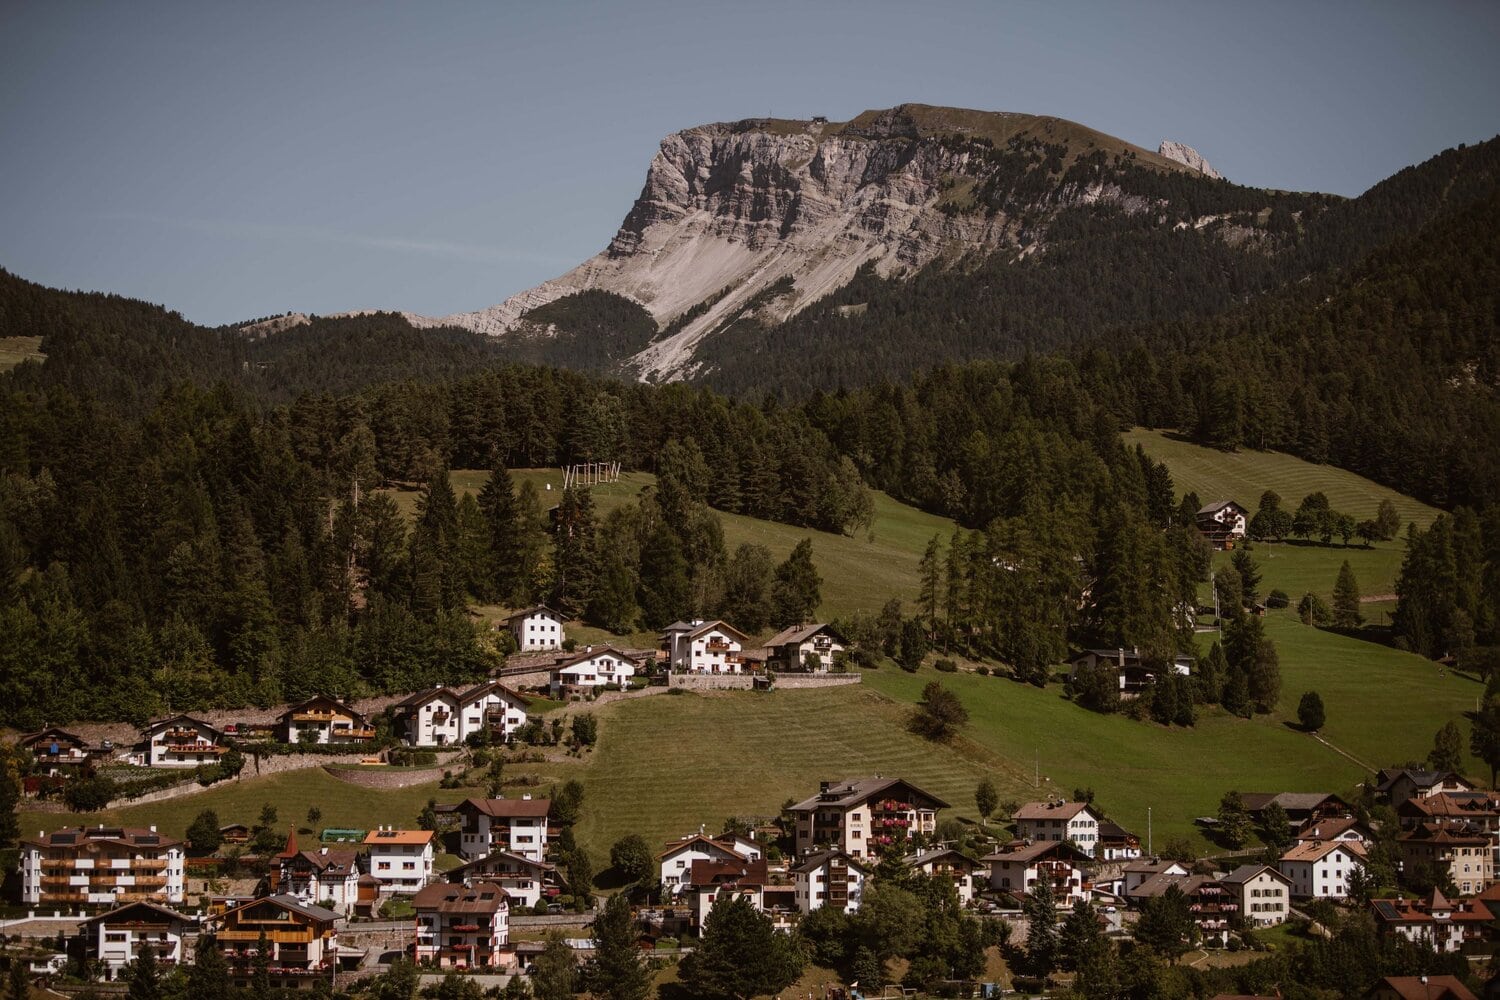 An overview landscape shot of the Italian Dolomites.